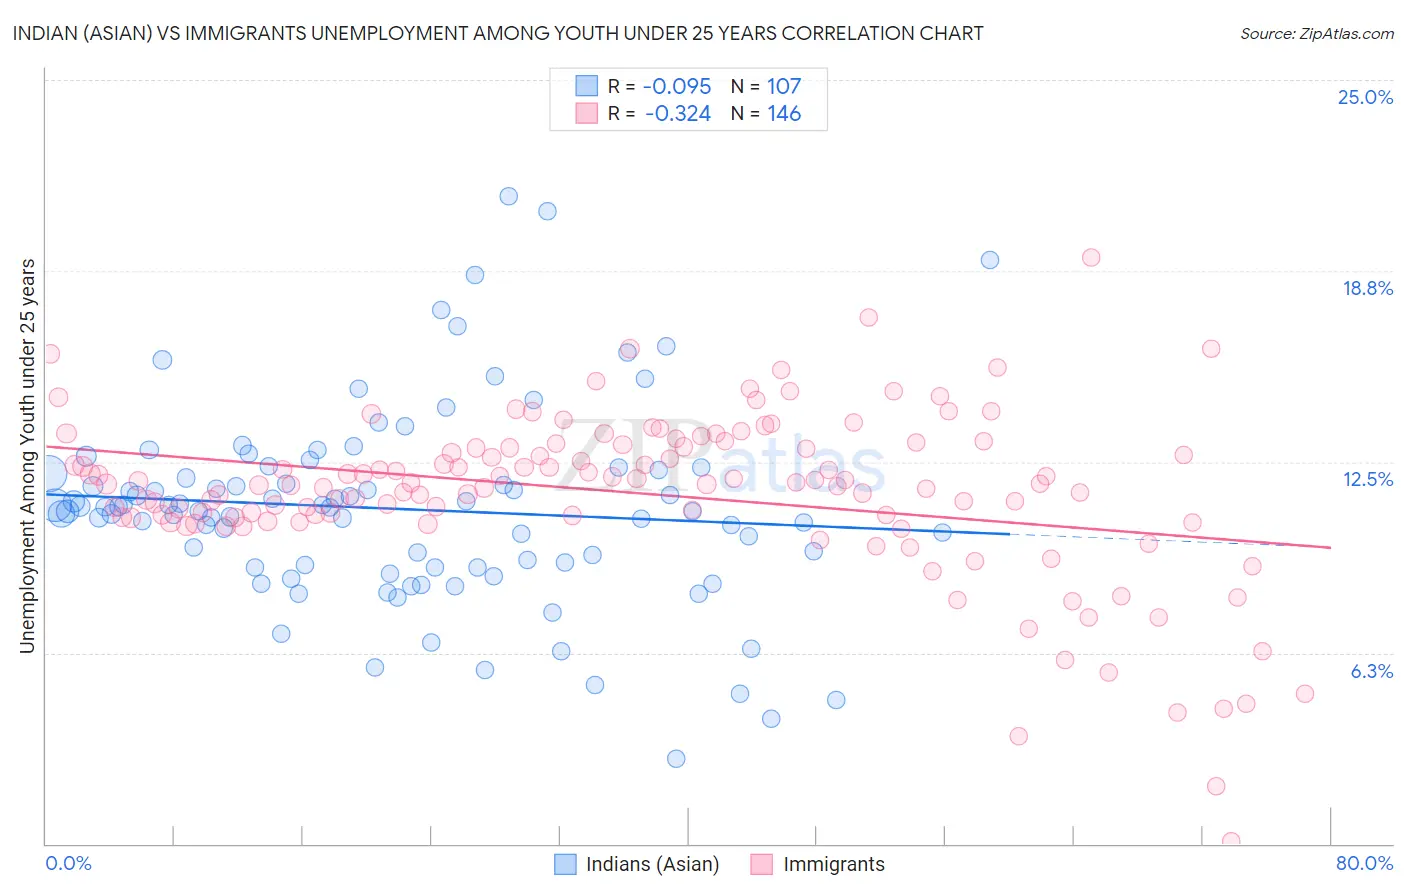 Indian (Asian) vs Immigrants Unemployment Among Youth under 25 years